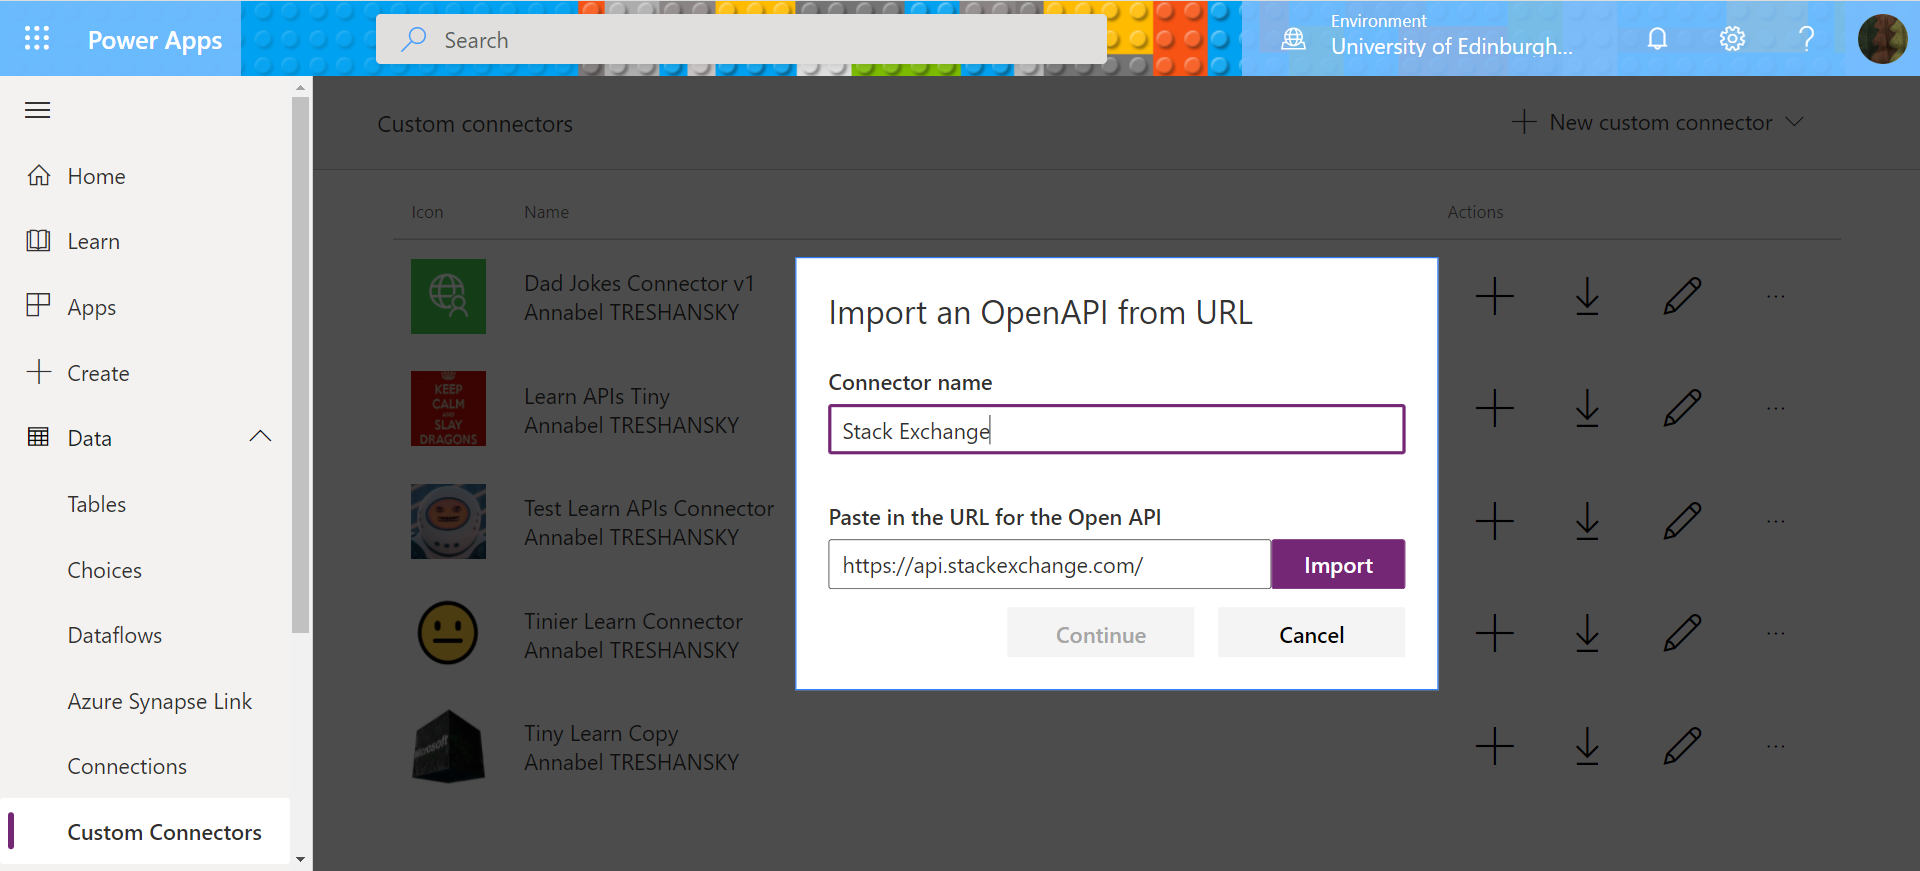 Power Apps Custom Connector: Trying to import the OpenAPI definition from a URL